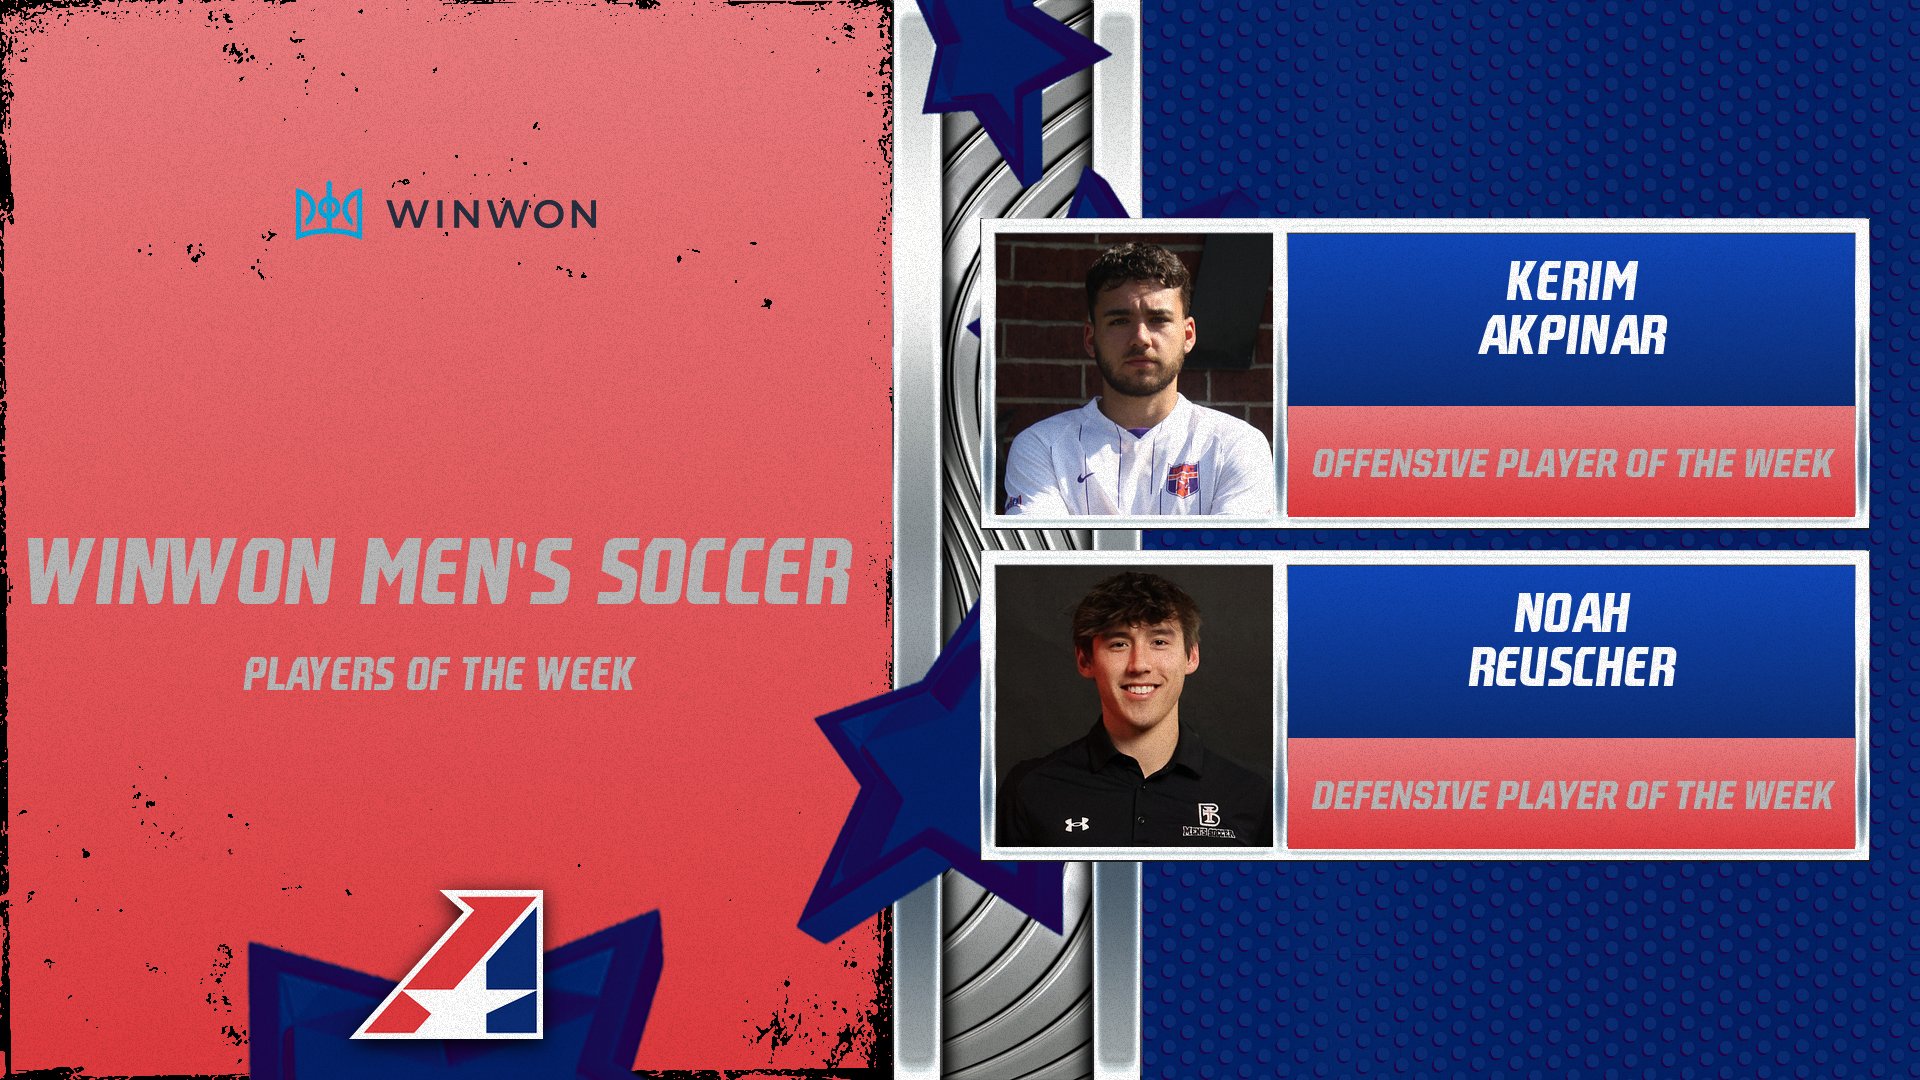 WinWon Men's Soccer Players of the Week Announced - October 16